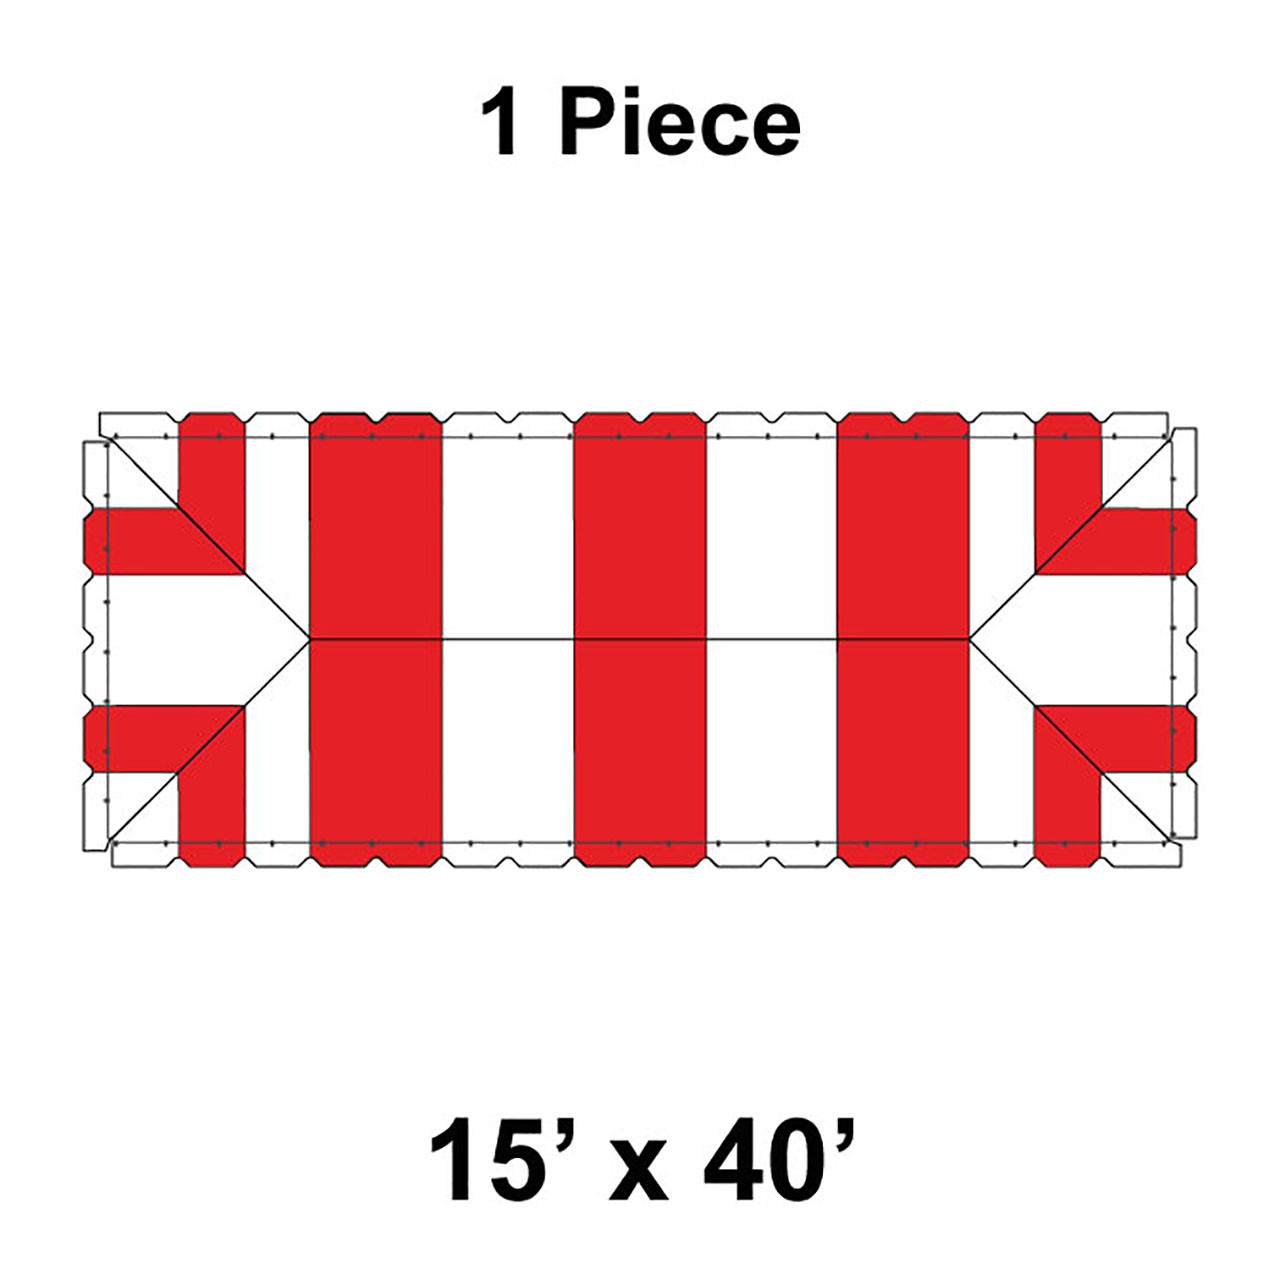 15' x 40' Classic Frame Tent, 1 Piece, 16 oz. Ratchet Top, White and Red